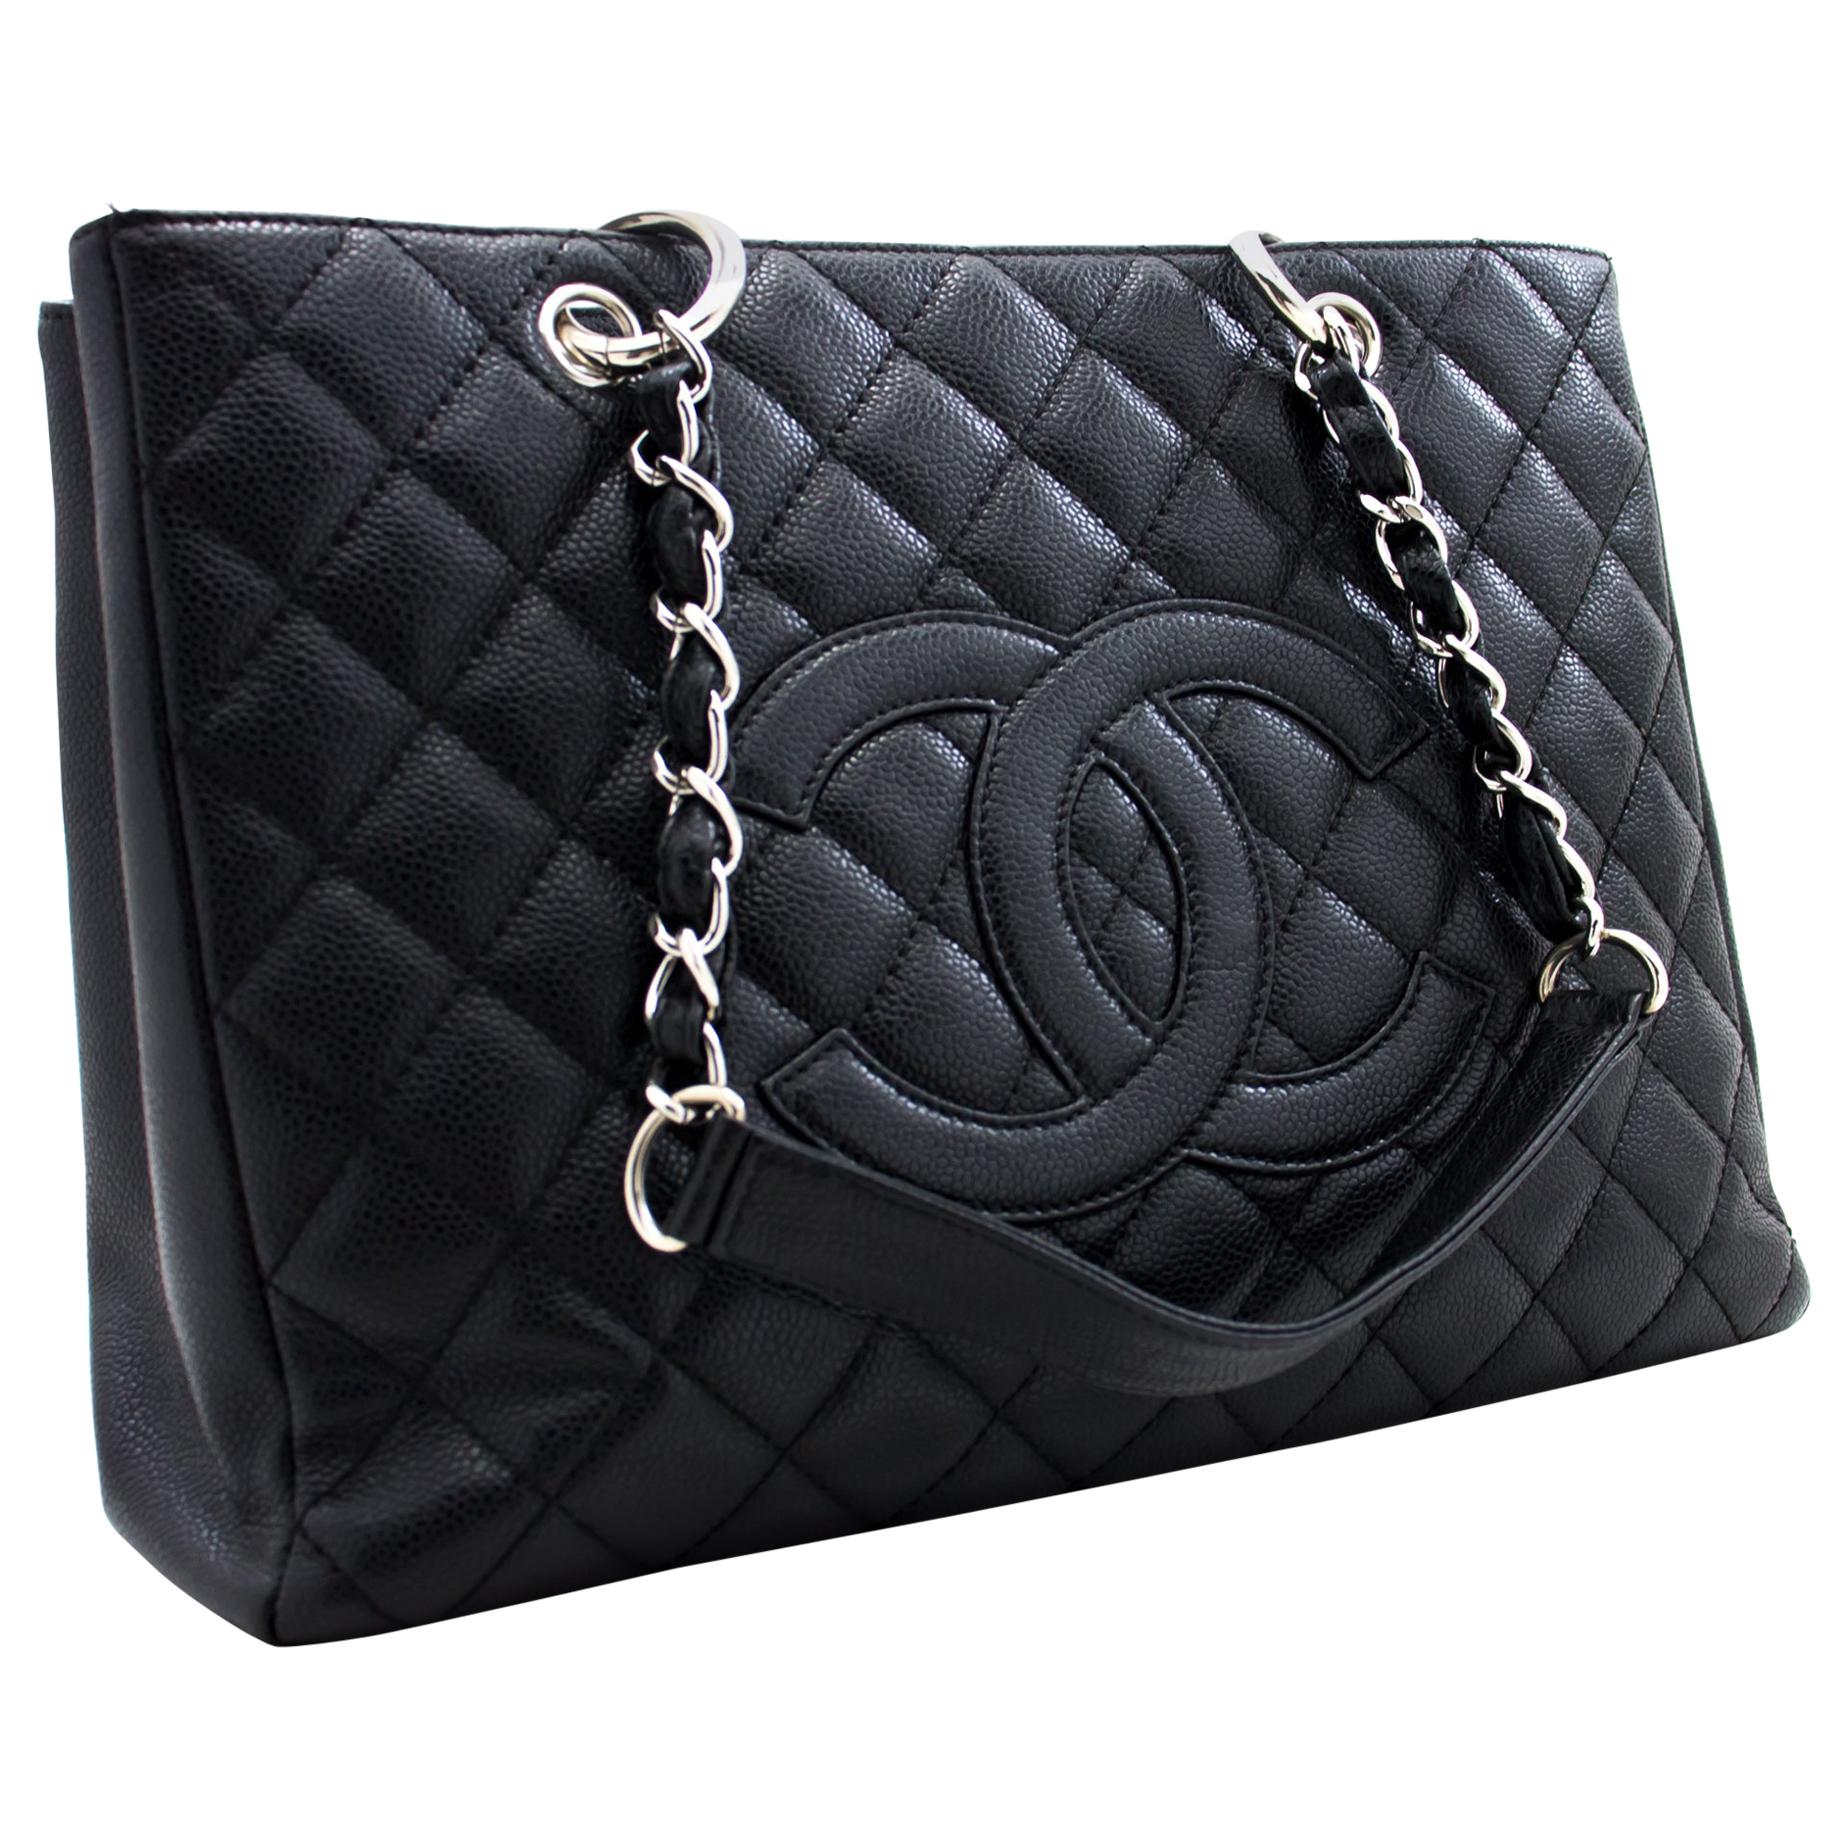 chanel tote patent leather